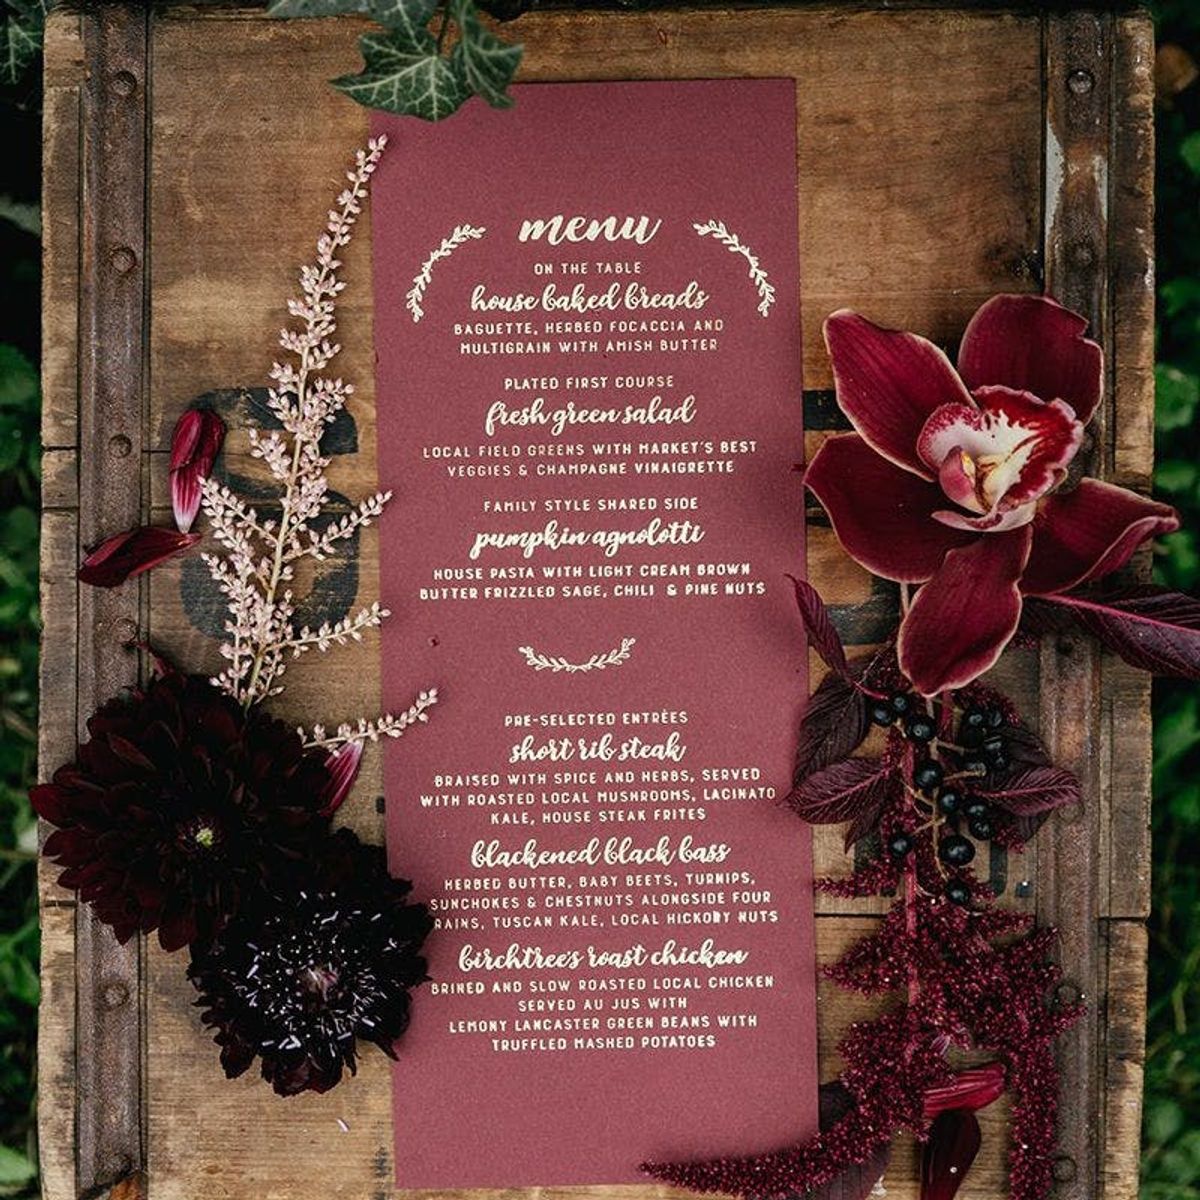 13 Trendy Wedding Ideas That Prove Burgundy Is the Must-Have Color for Fall